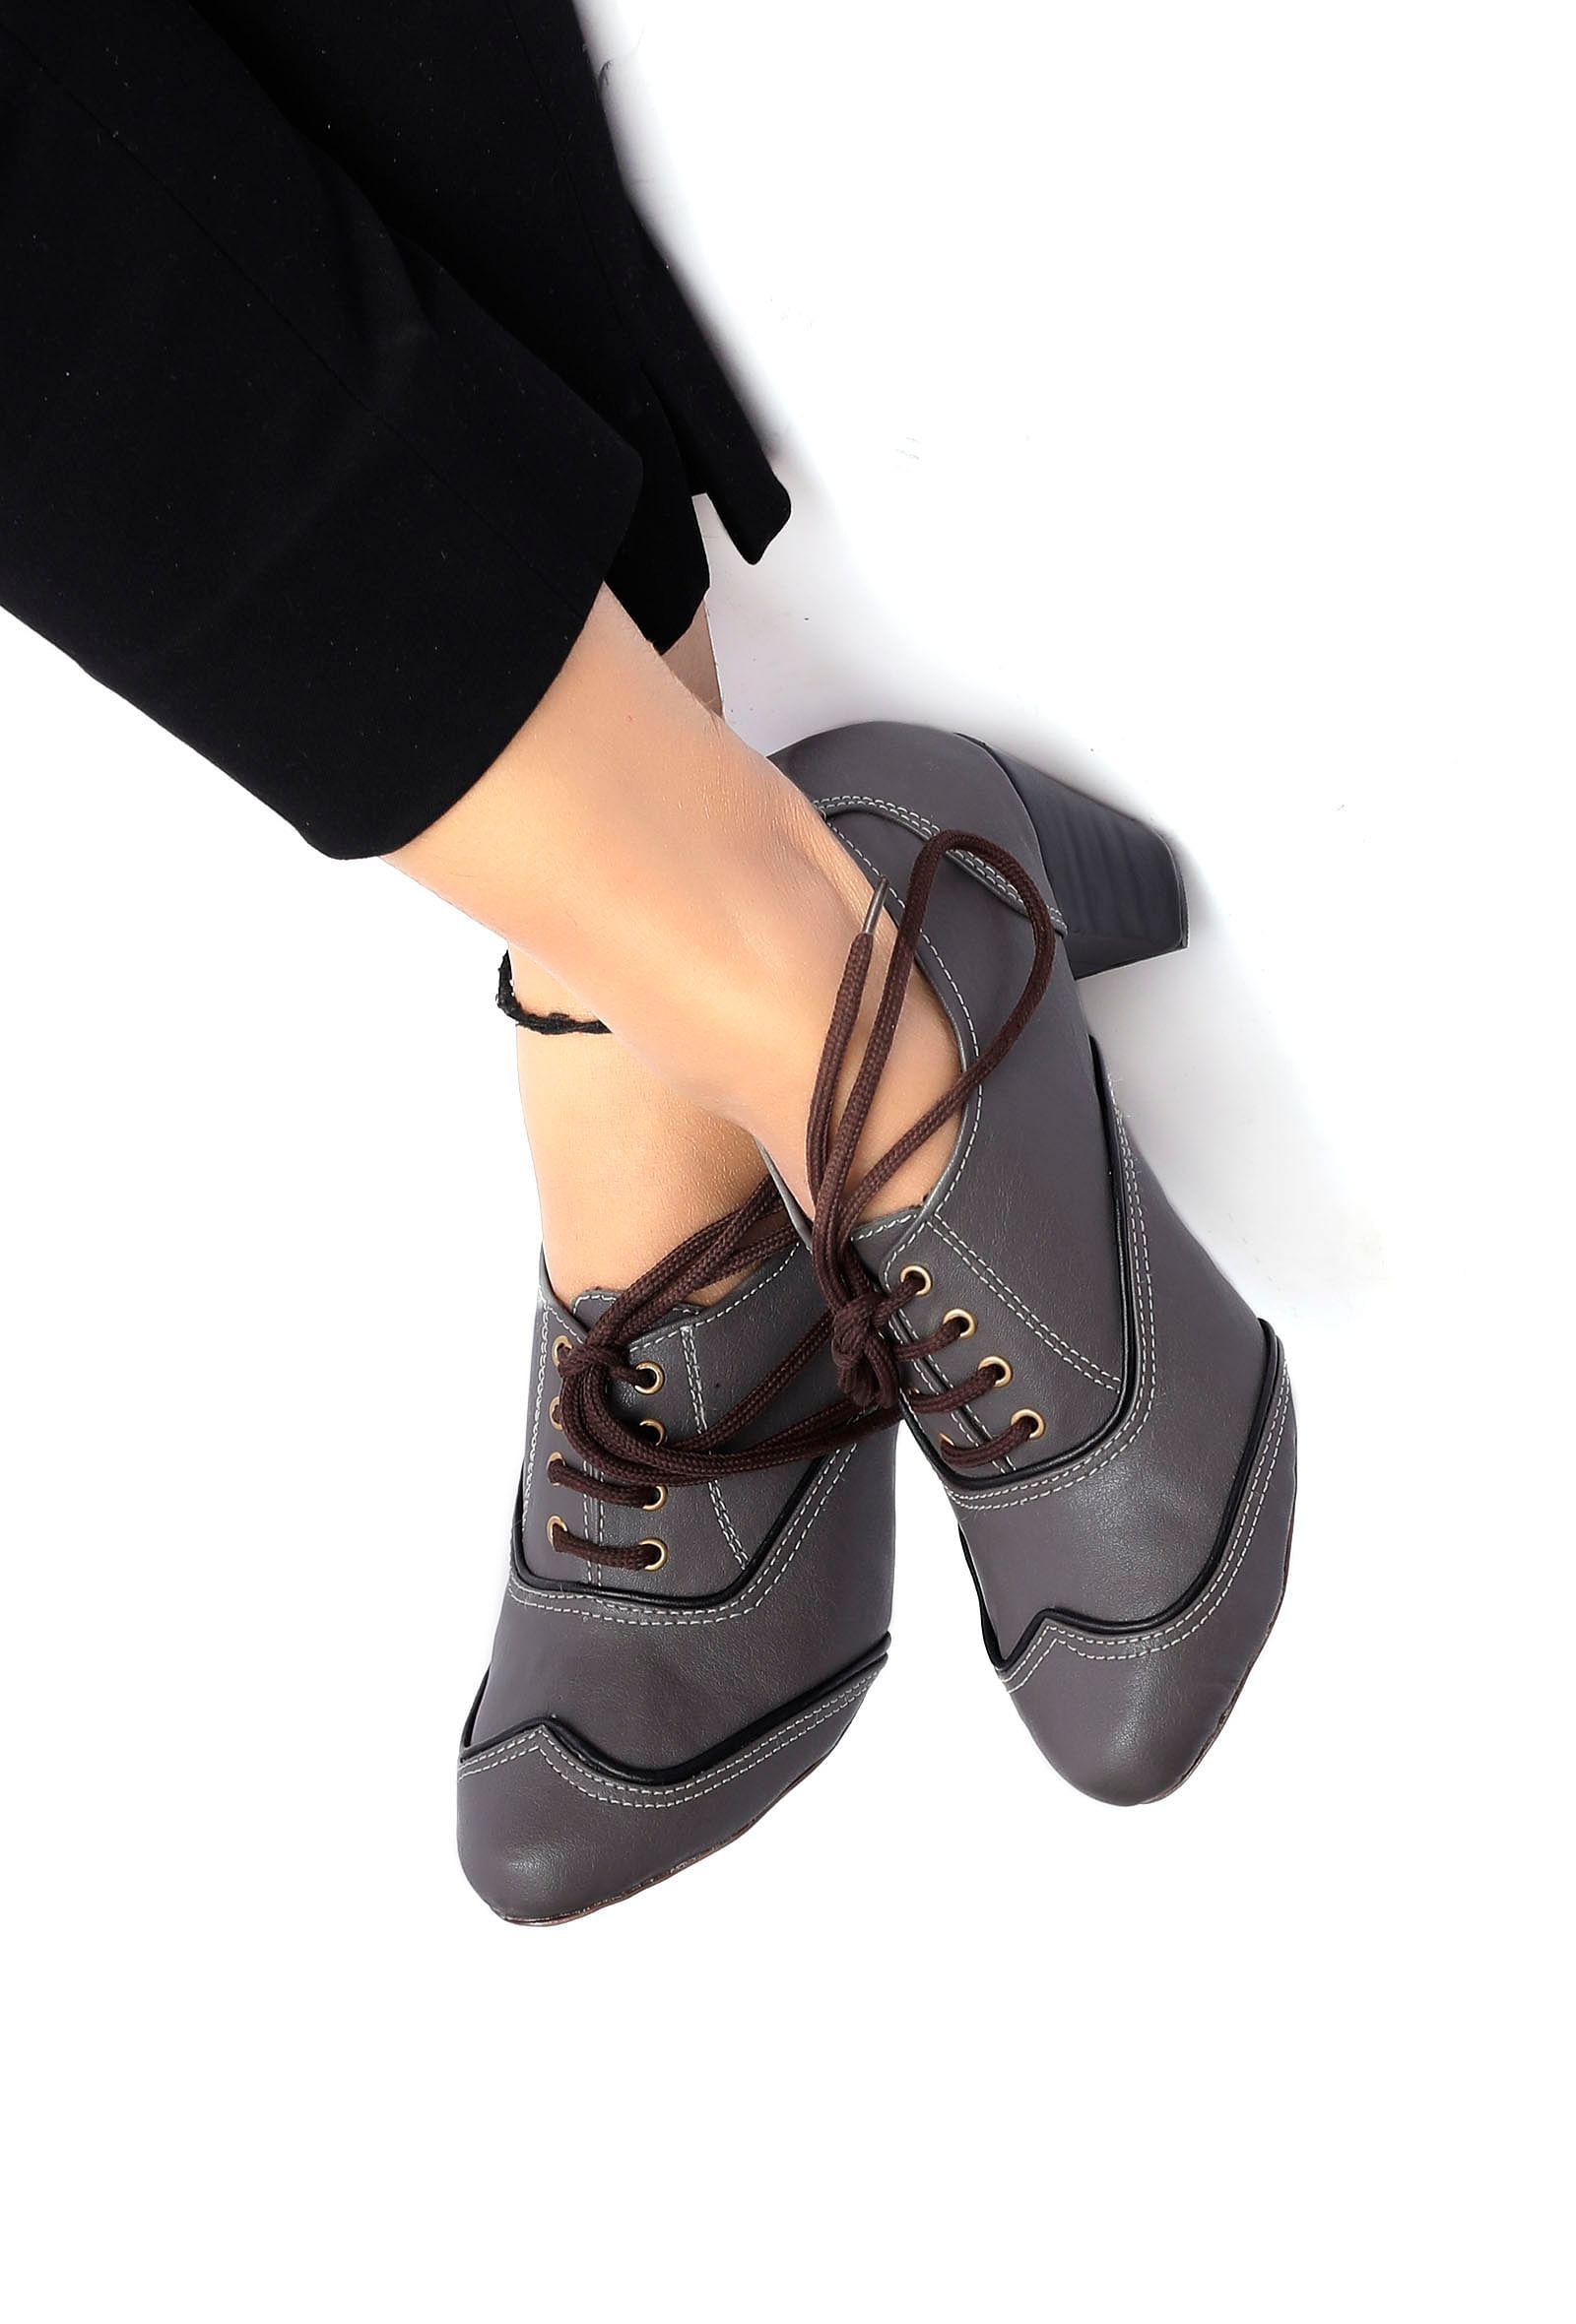 dove-grey-cruelty-free-leather-oxford-heel-boots